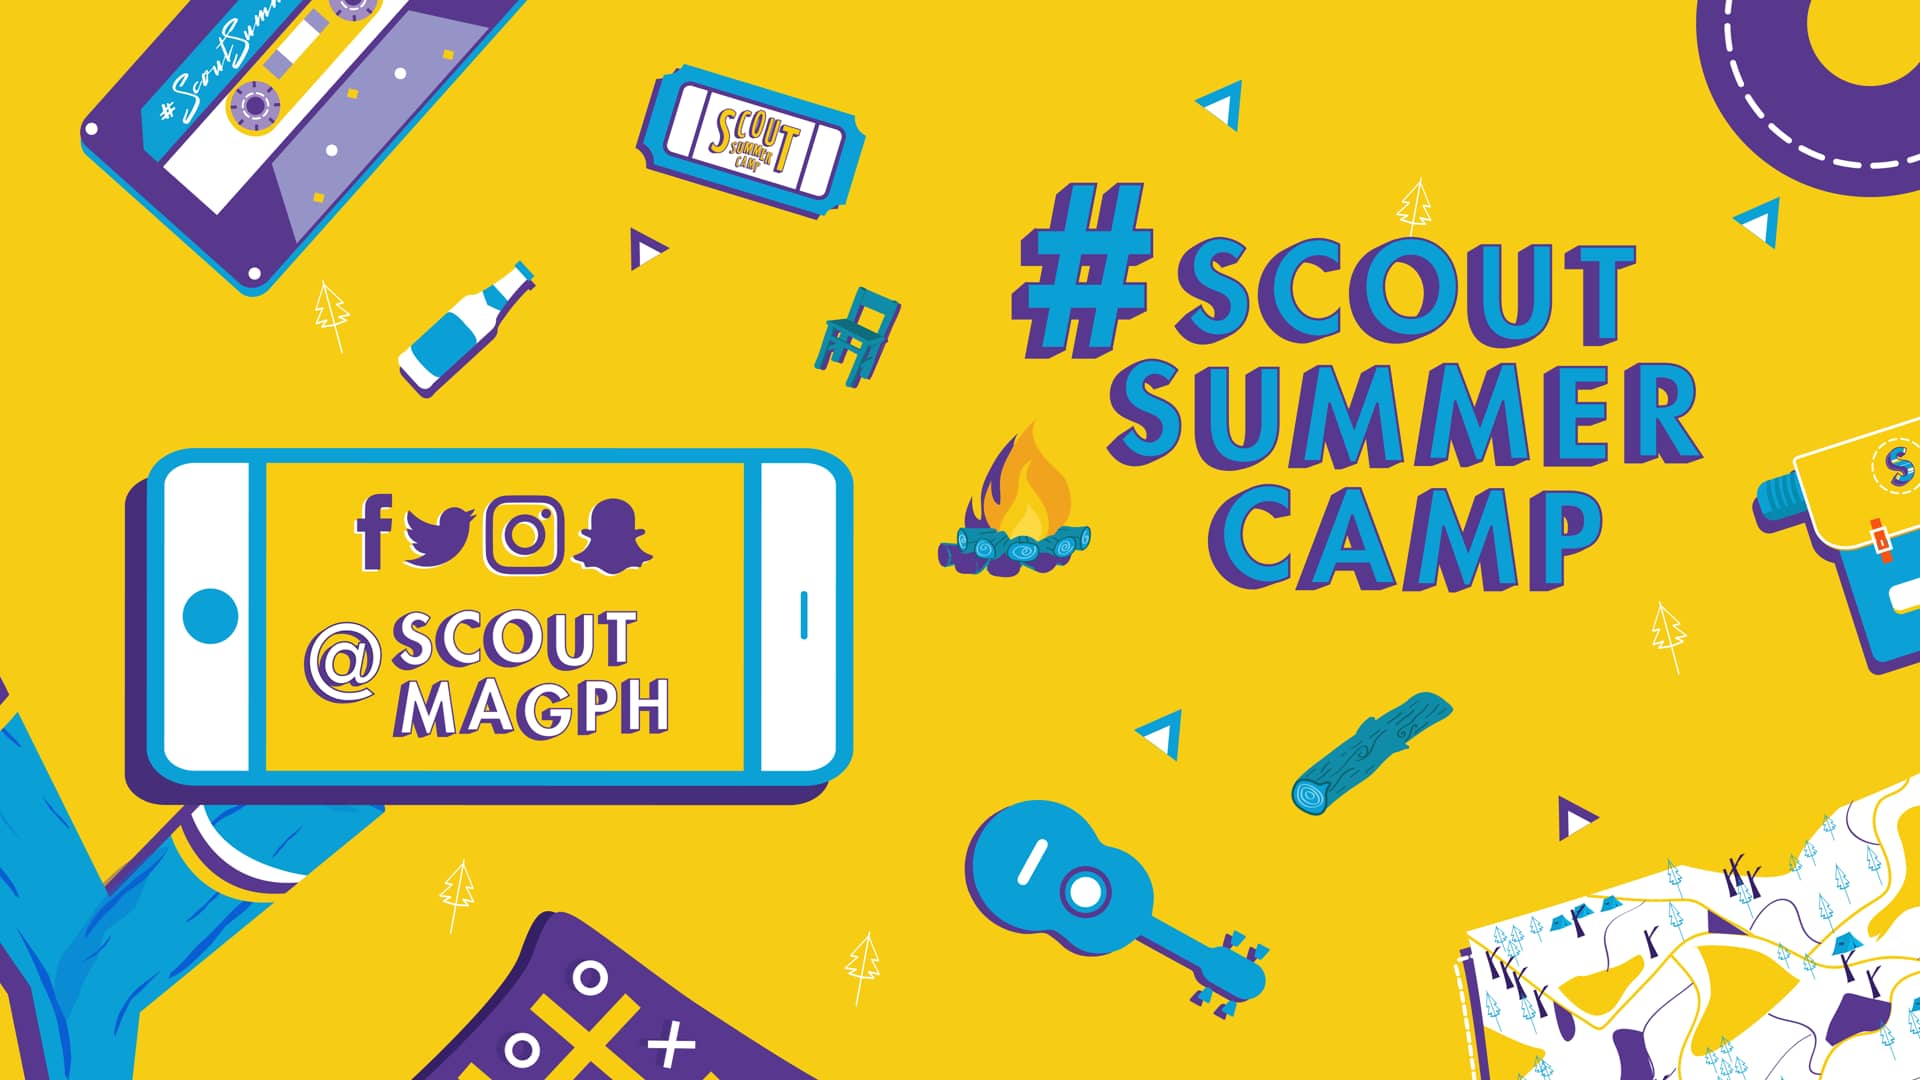 Scout Summer Camp (Promotional Vid Uncut) on Vimeo